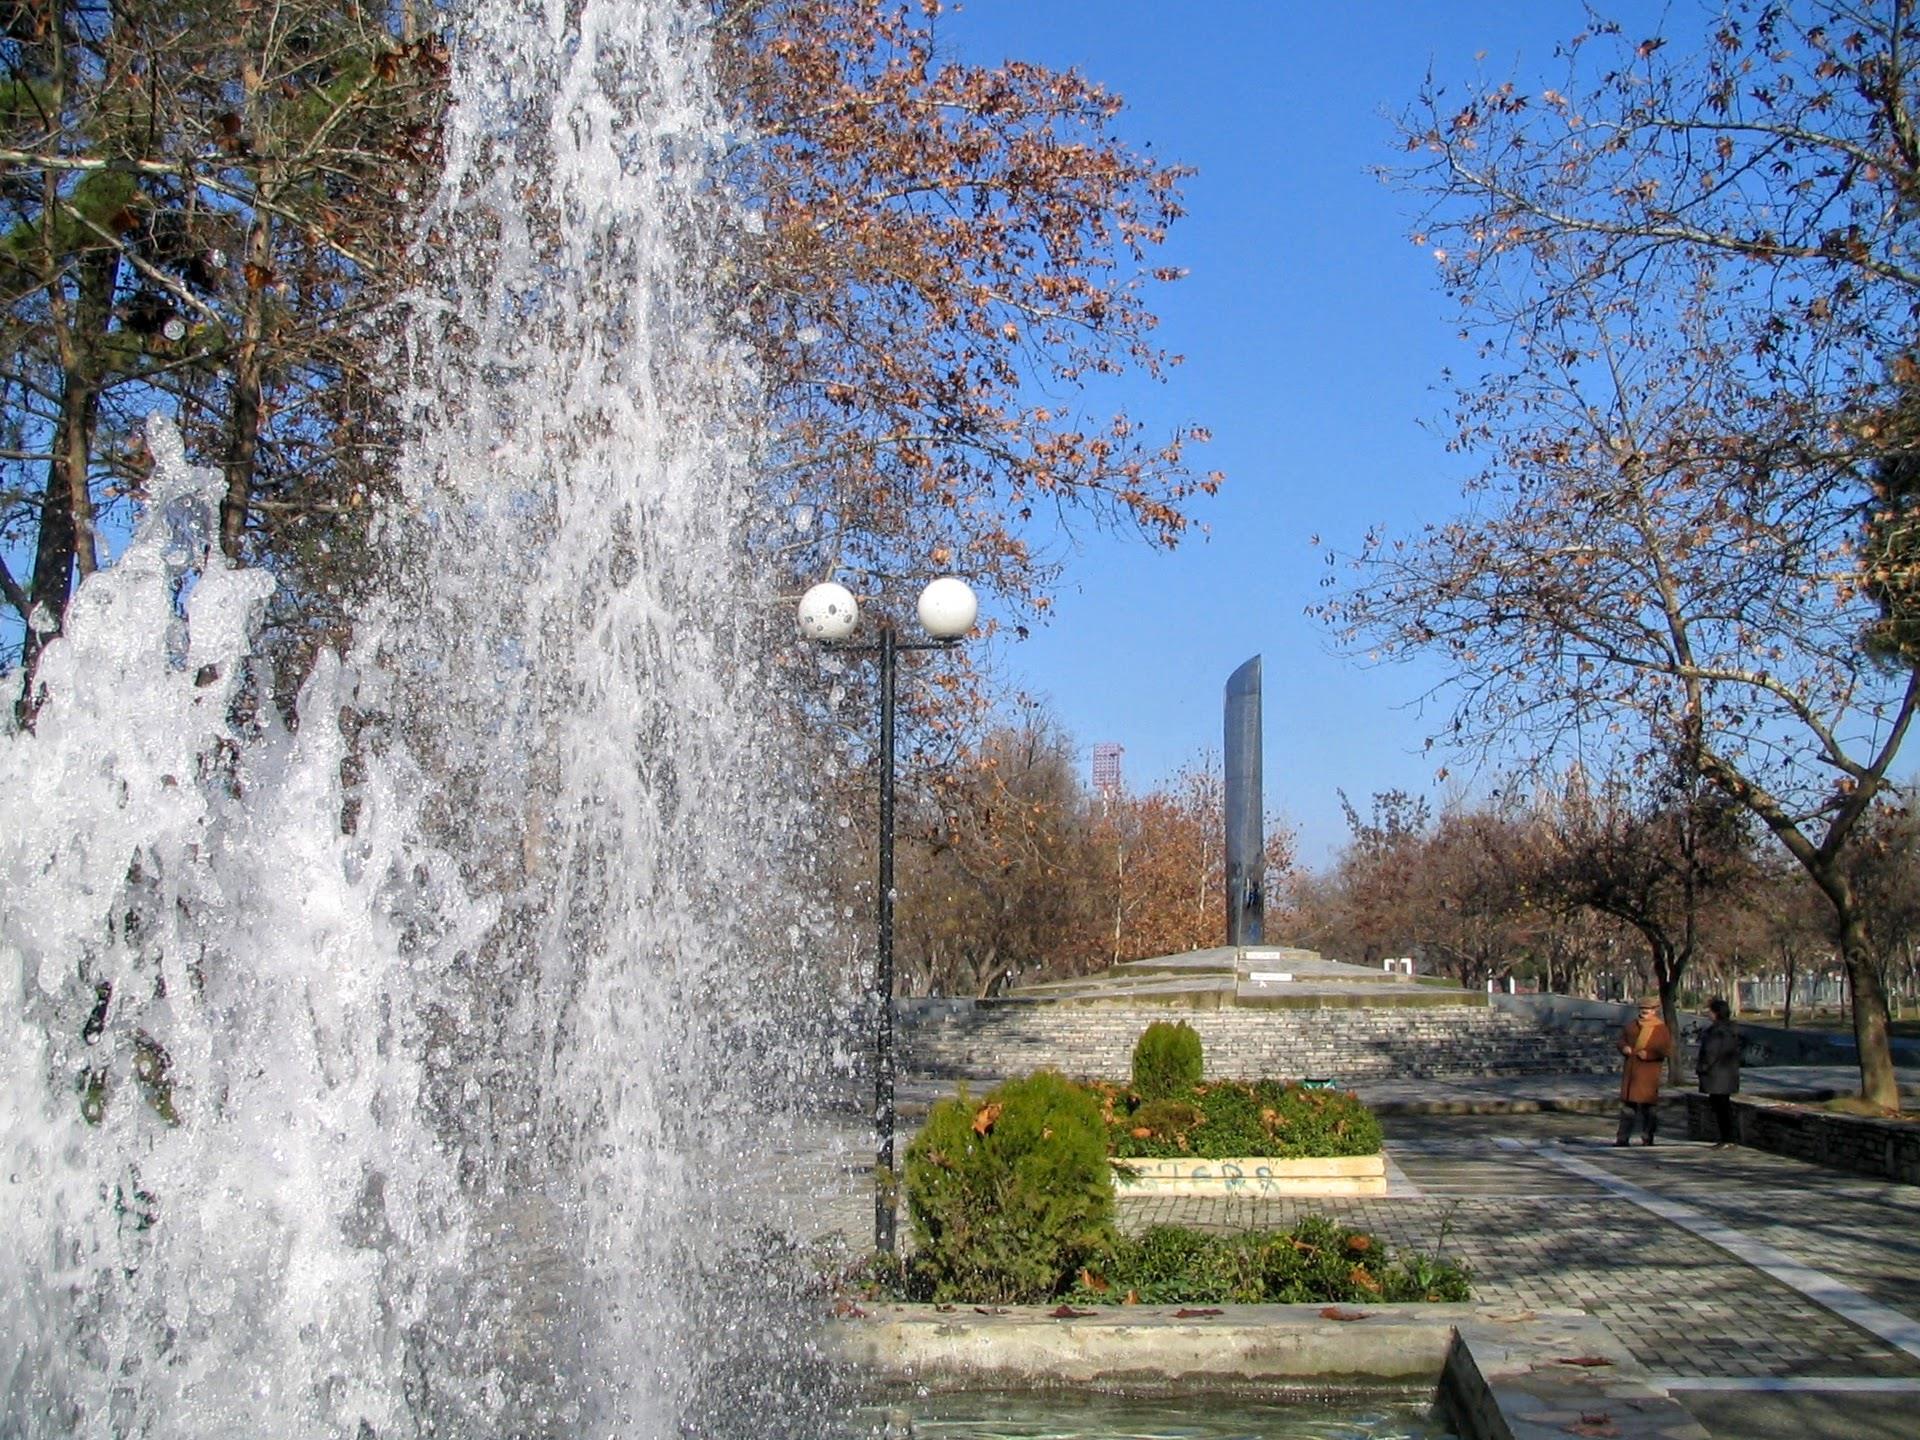 A fountain in Larissa Park. In the back one can see a monument created by the artist Filolaos Tloupas from Larissa. LARISSA (Town) THESSALIA